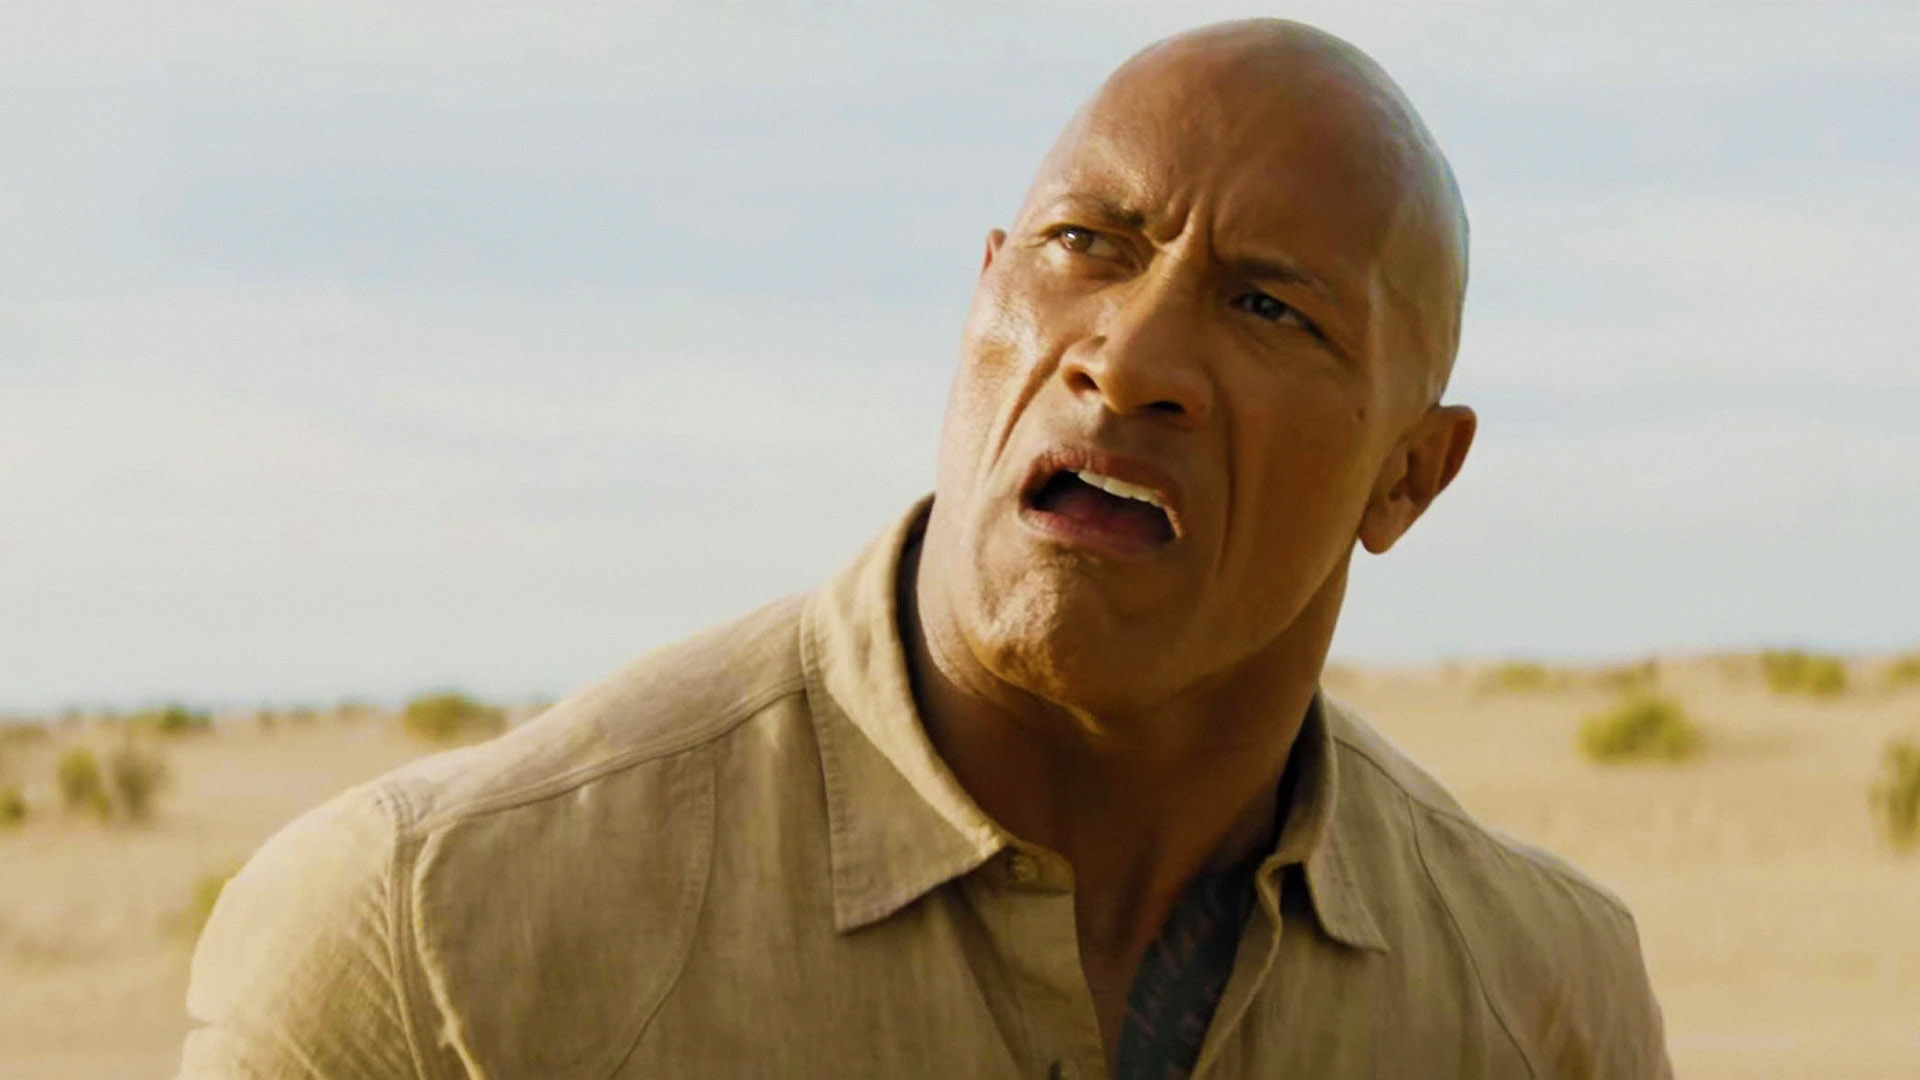 The Rock's Biggest Regret? Turning Down $1 Billion Franchise That Went to Mark Wahlberg